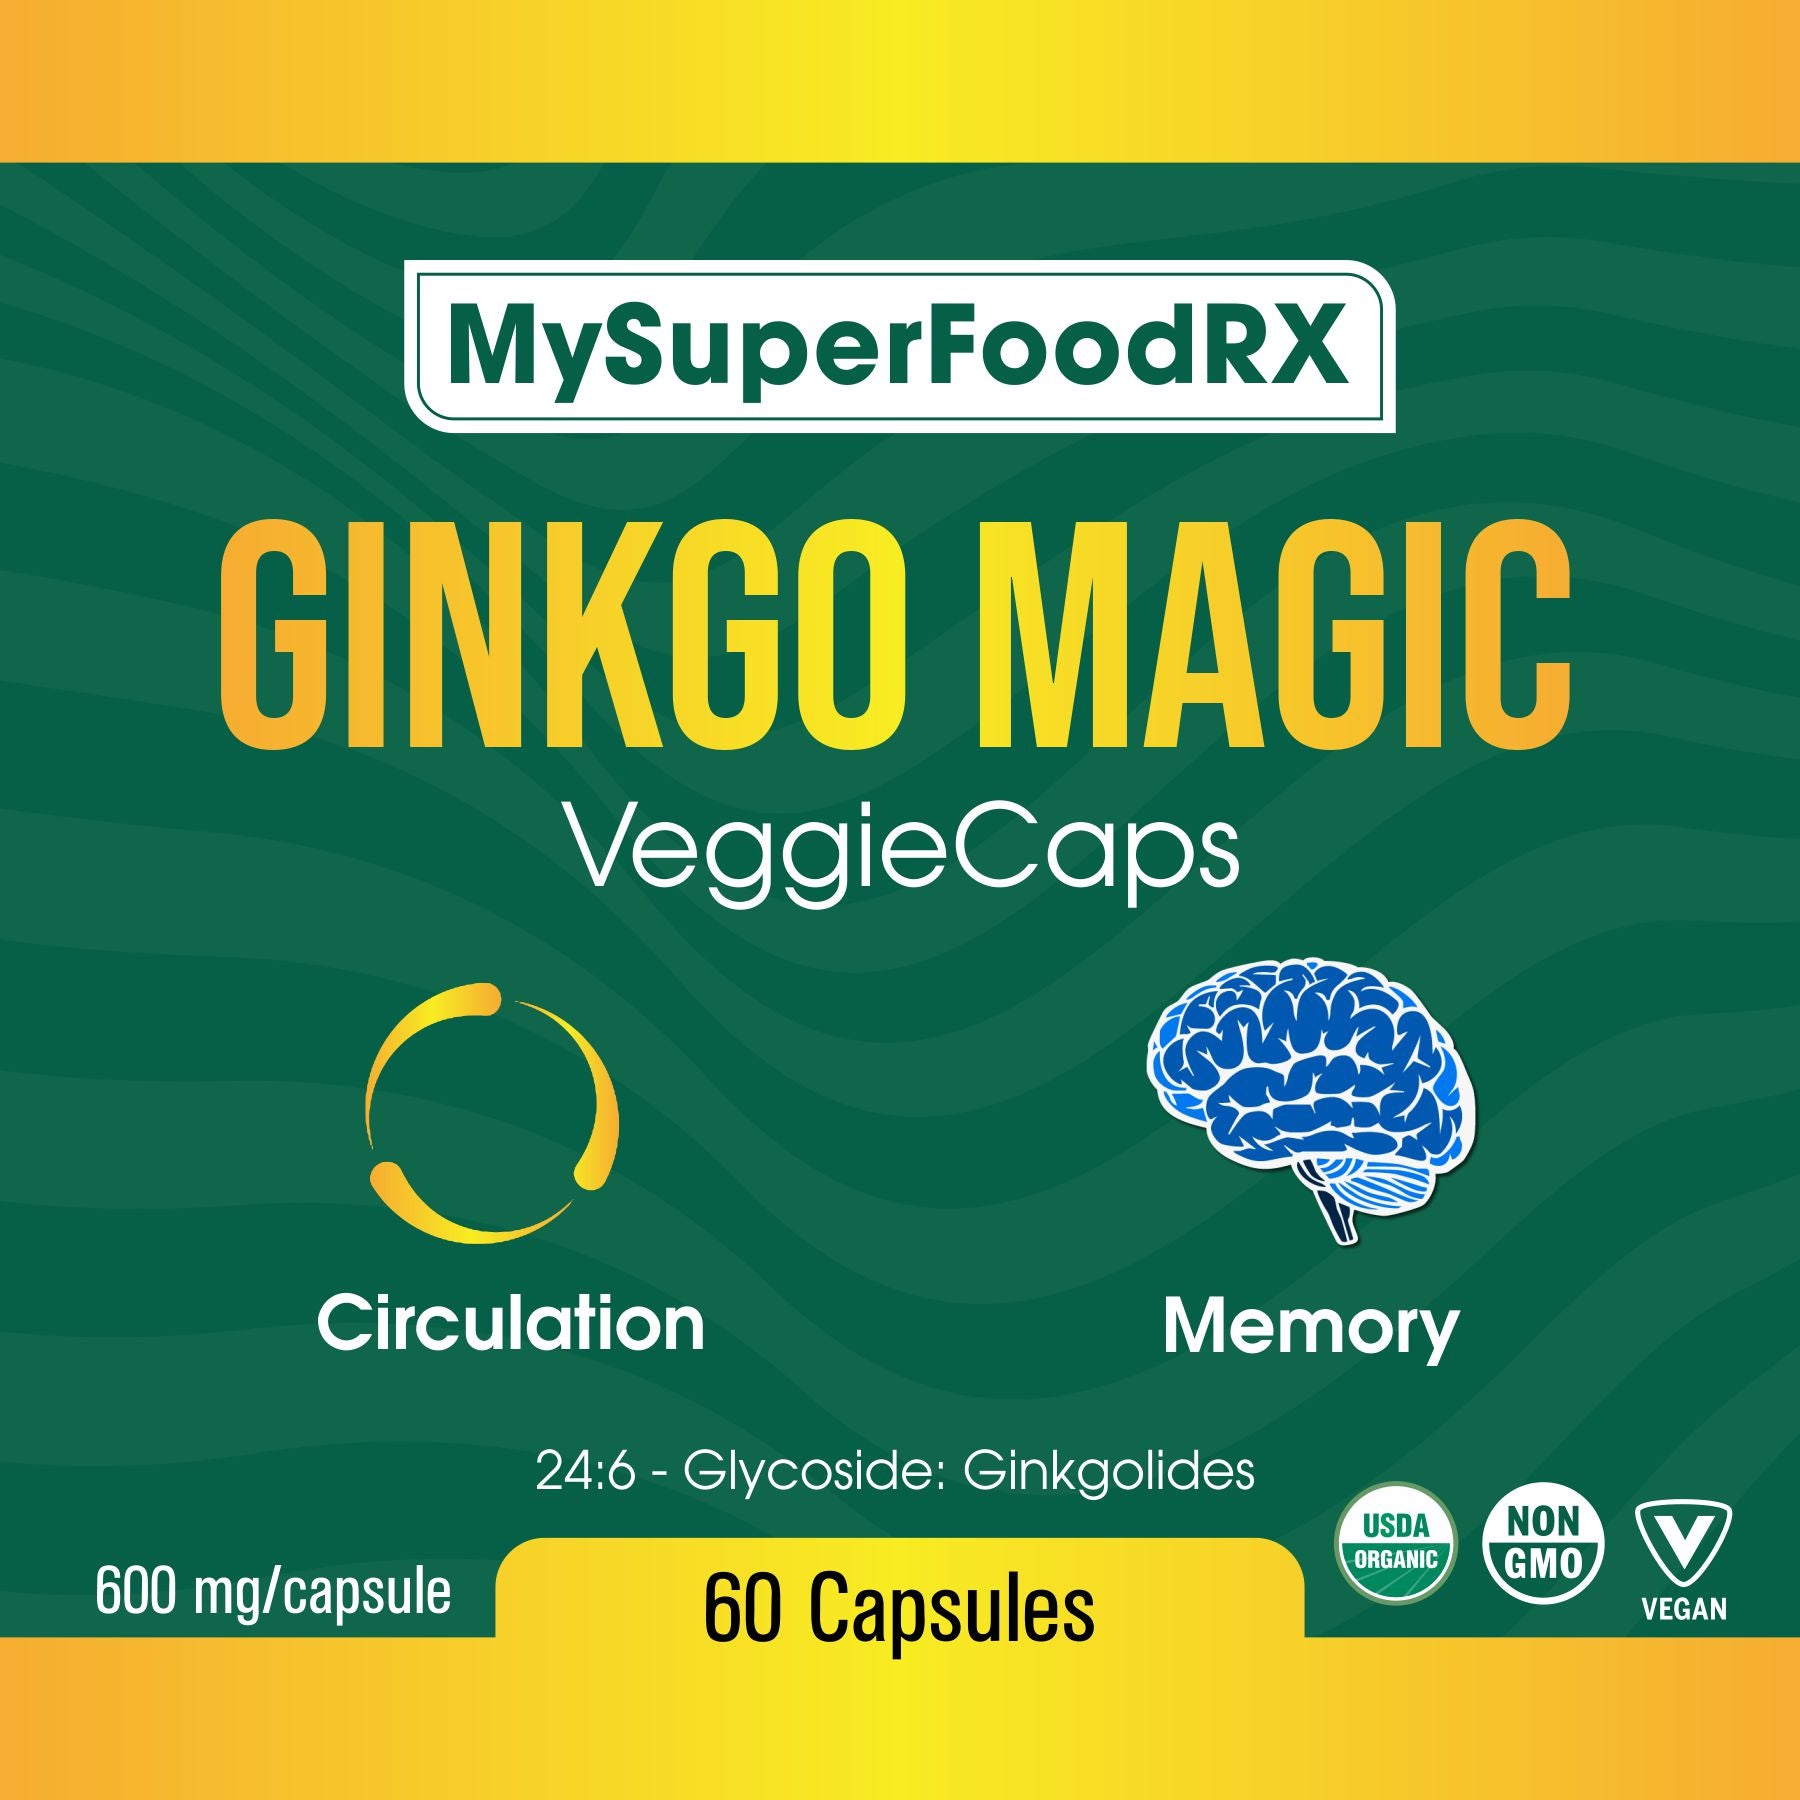 the label for my superfood rx ginkgo magic veggie